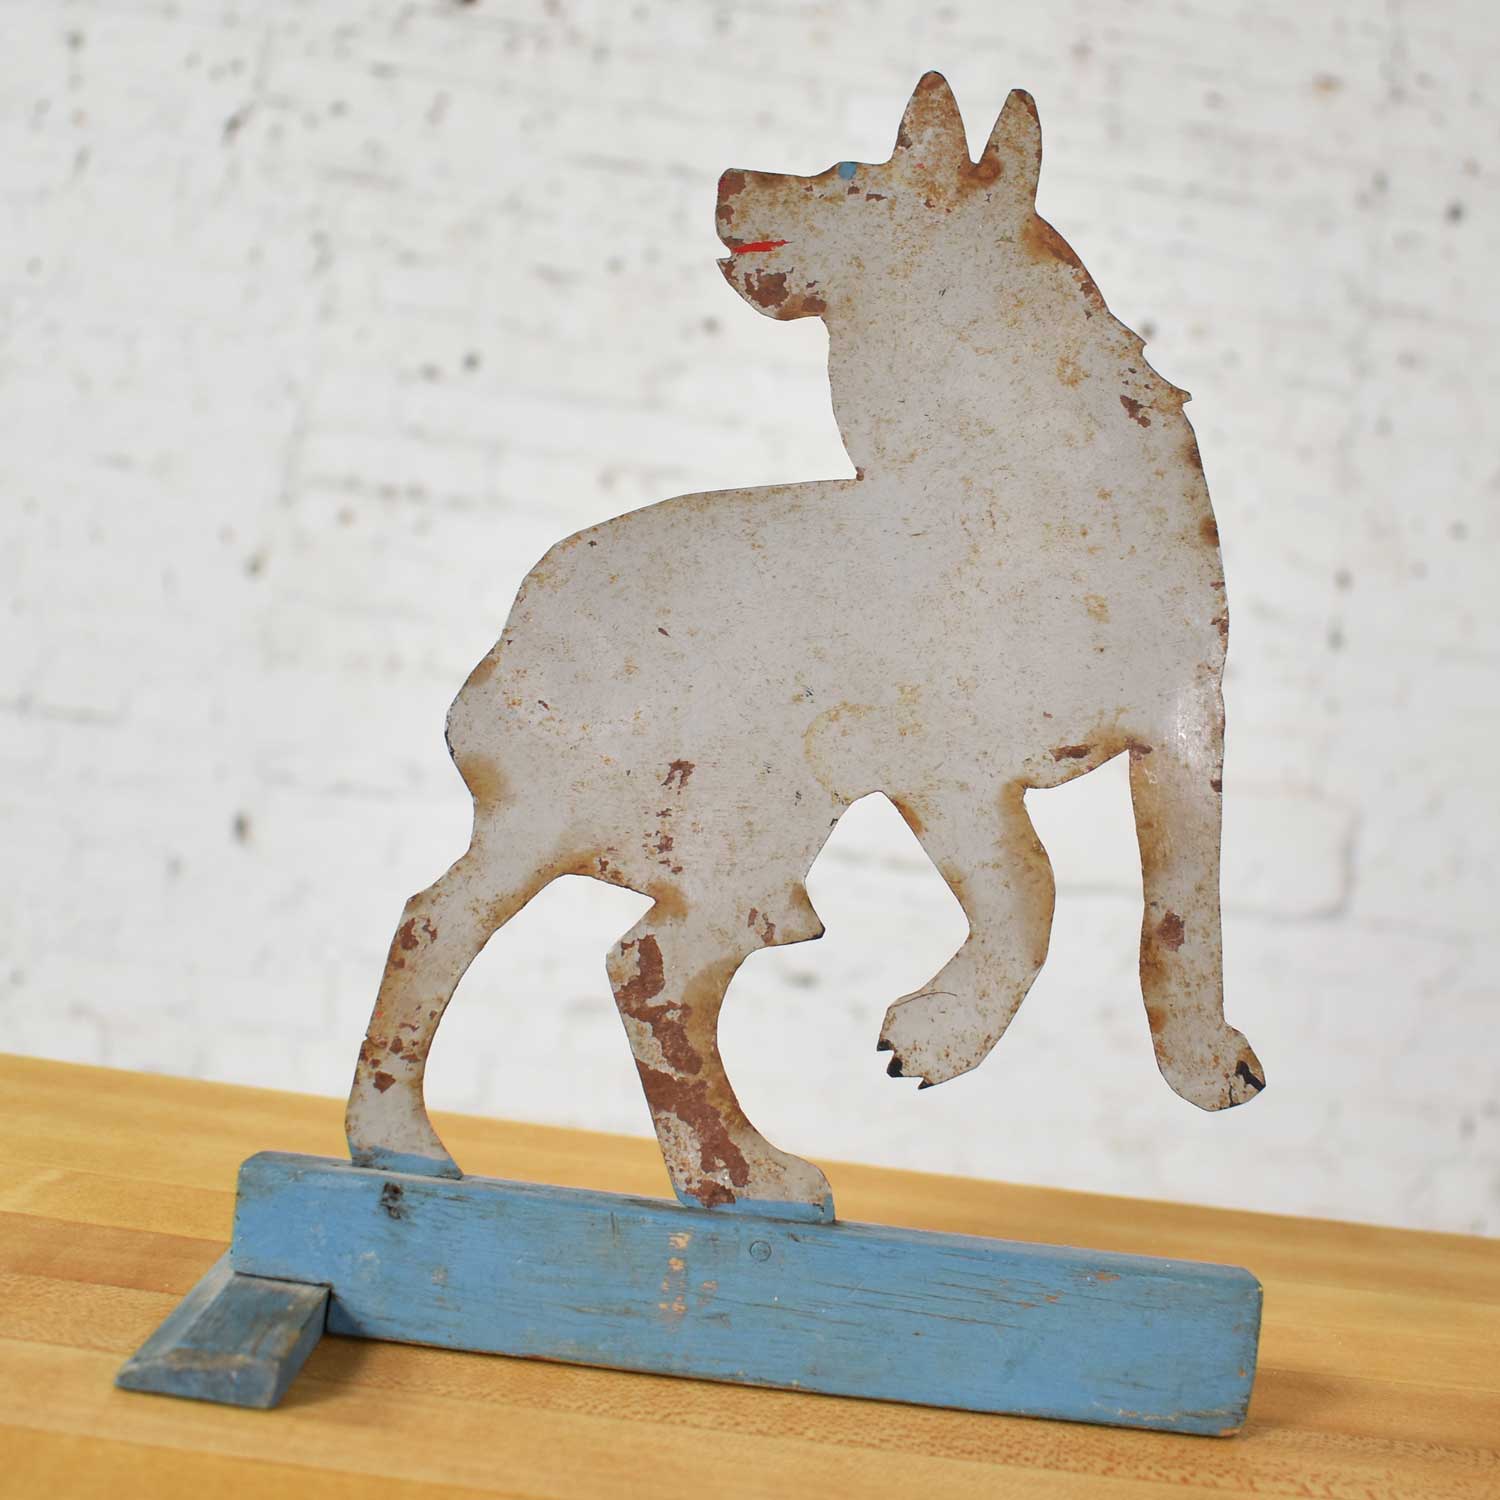 Antique Dog or Wolf Tin Cutout and Painted Folk Art Sculpture on a Wood Base